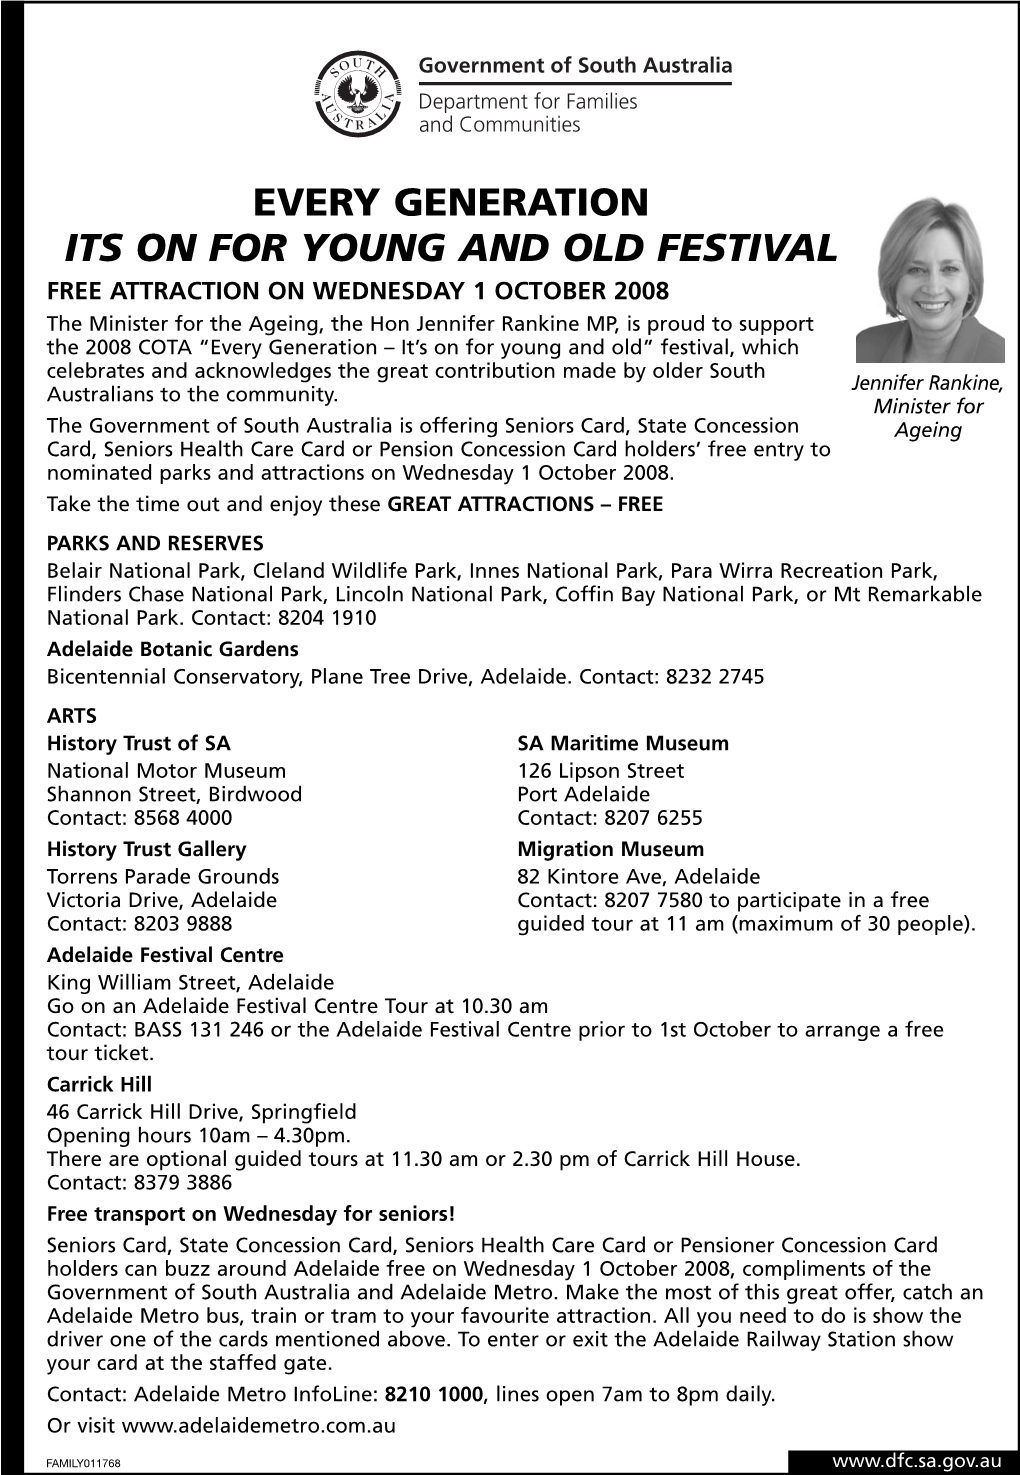 Every Generation Its on for Young and Old Festival